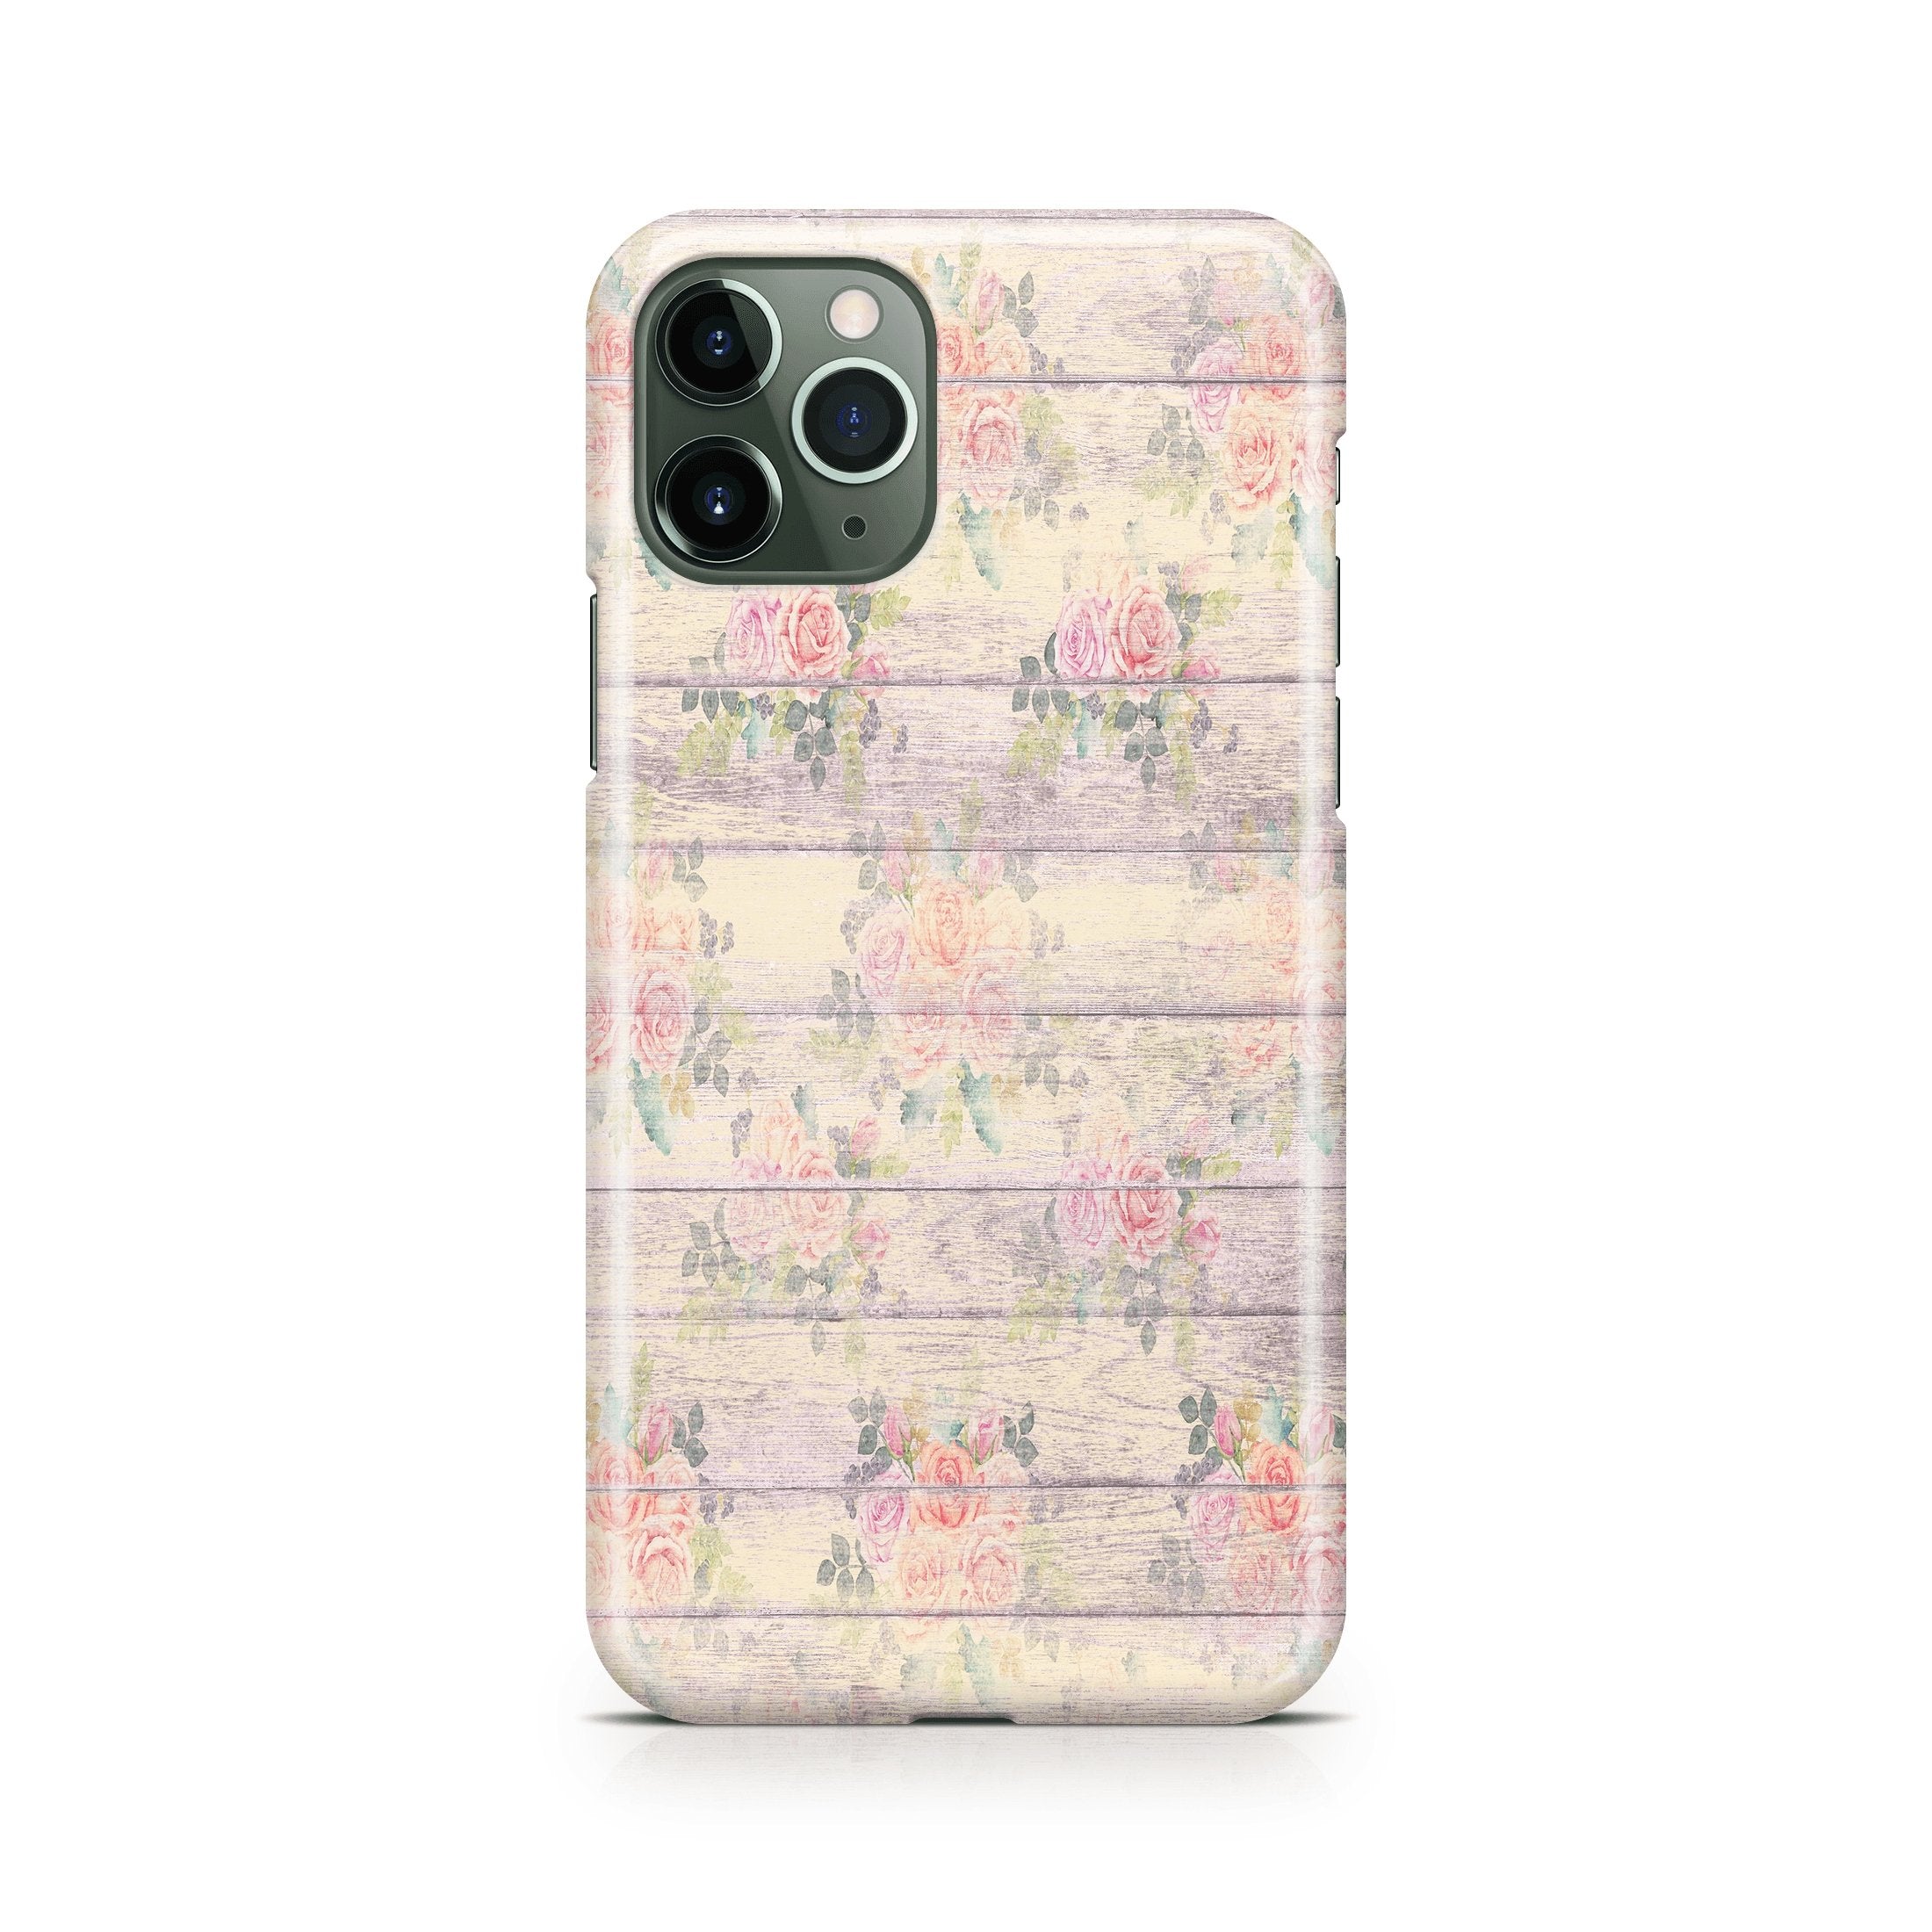 Shabby Chic Rosewood - iPhone phone case designs by CaseSwagger